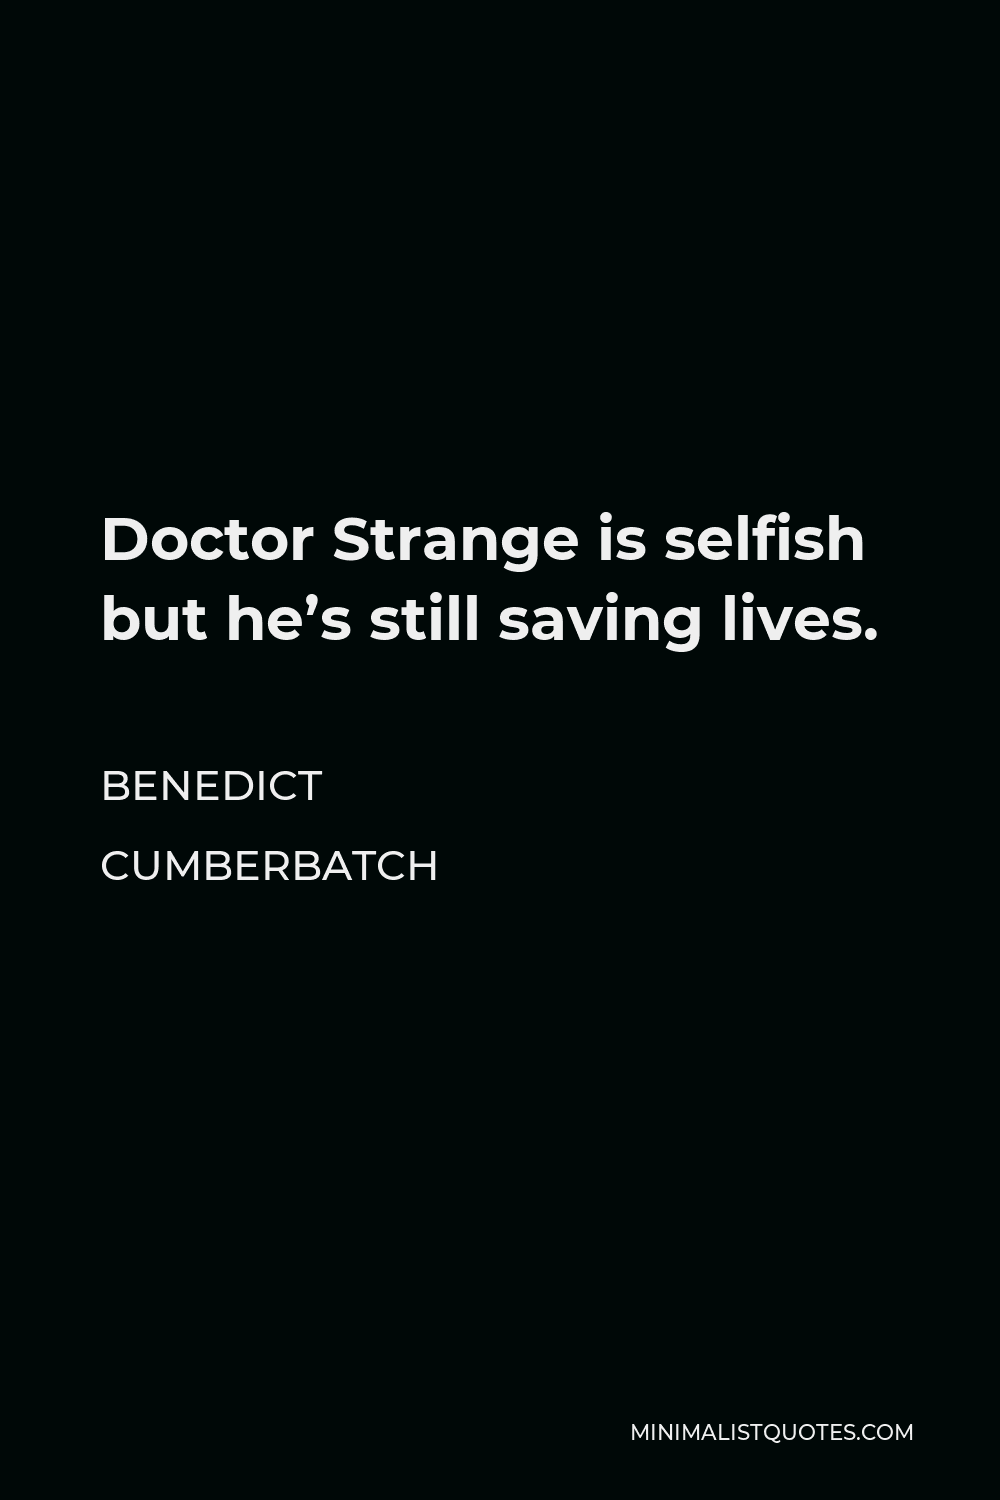 Benedict Cumberbatch Quote - Doctor Strange is selfish but he’s still saving lives.